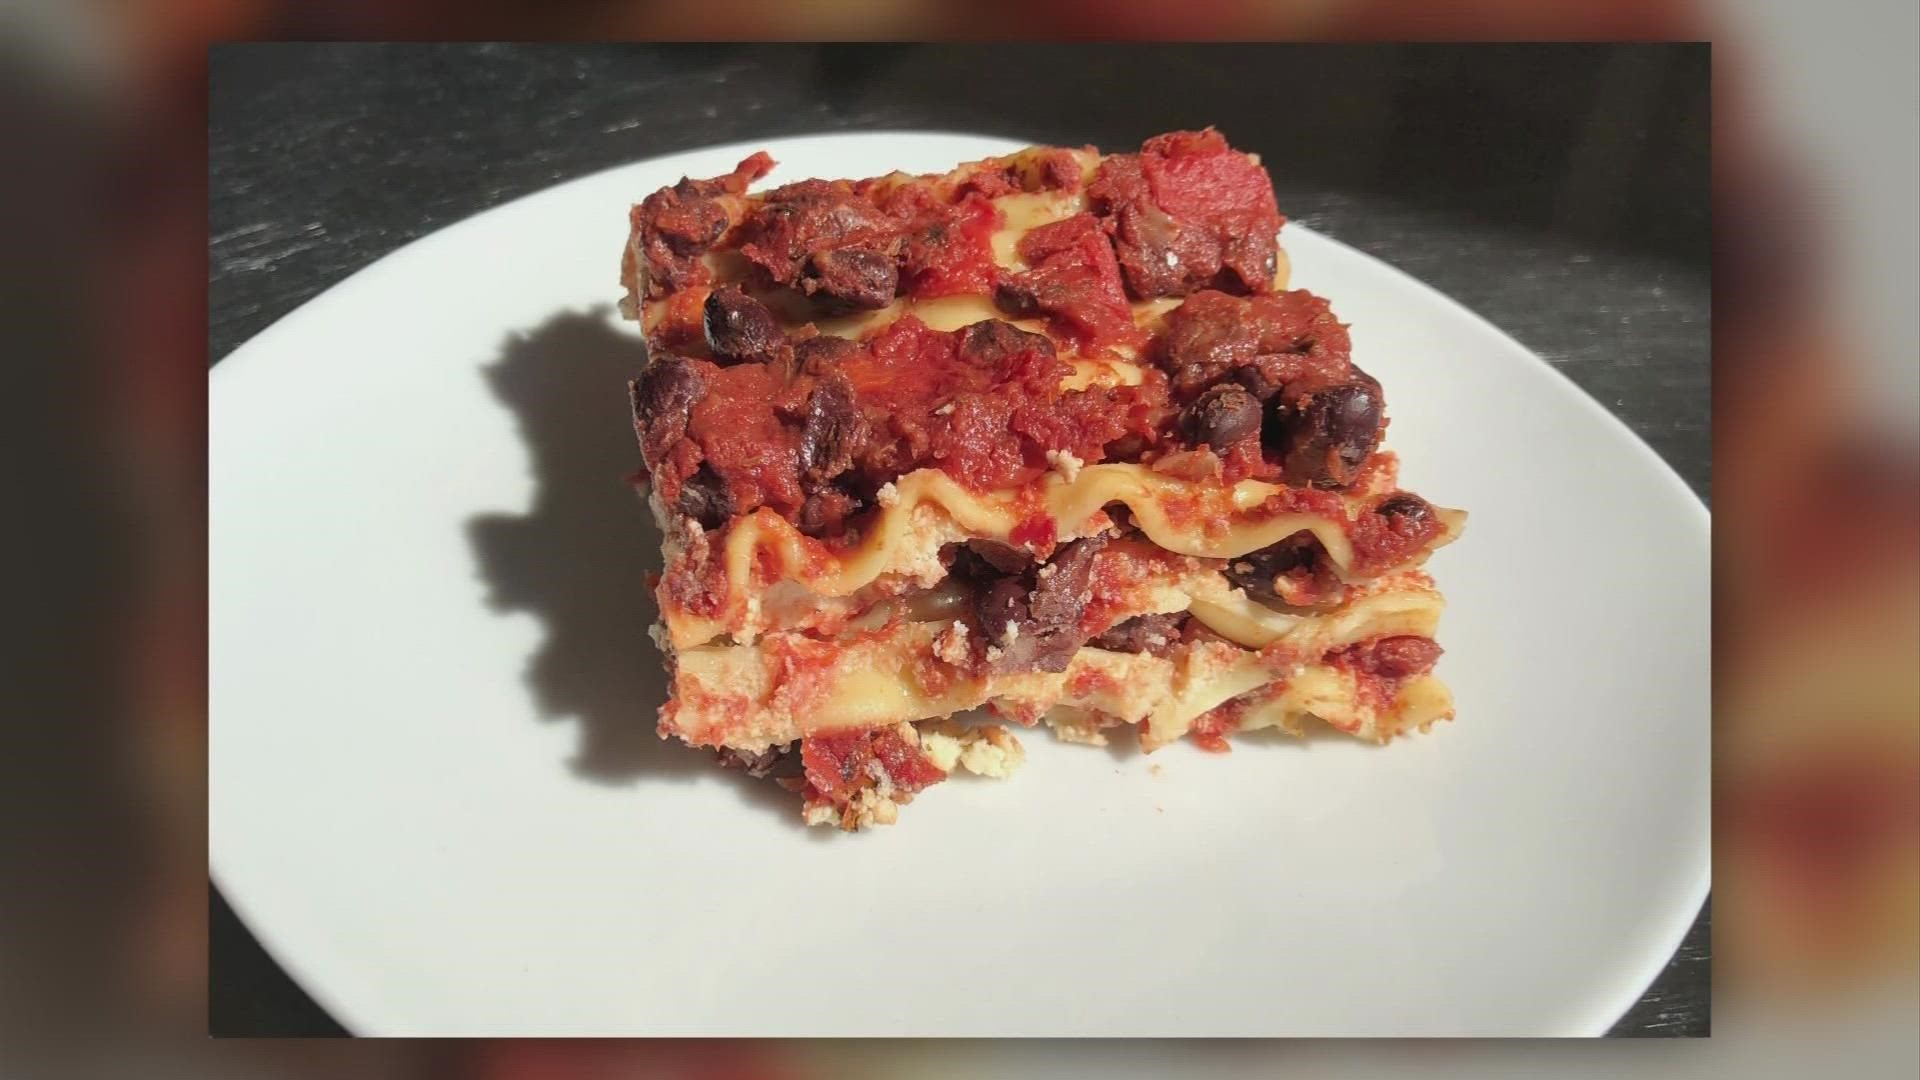 You can forget about the meat and add some beans in this delicious lasagna recipe.